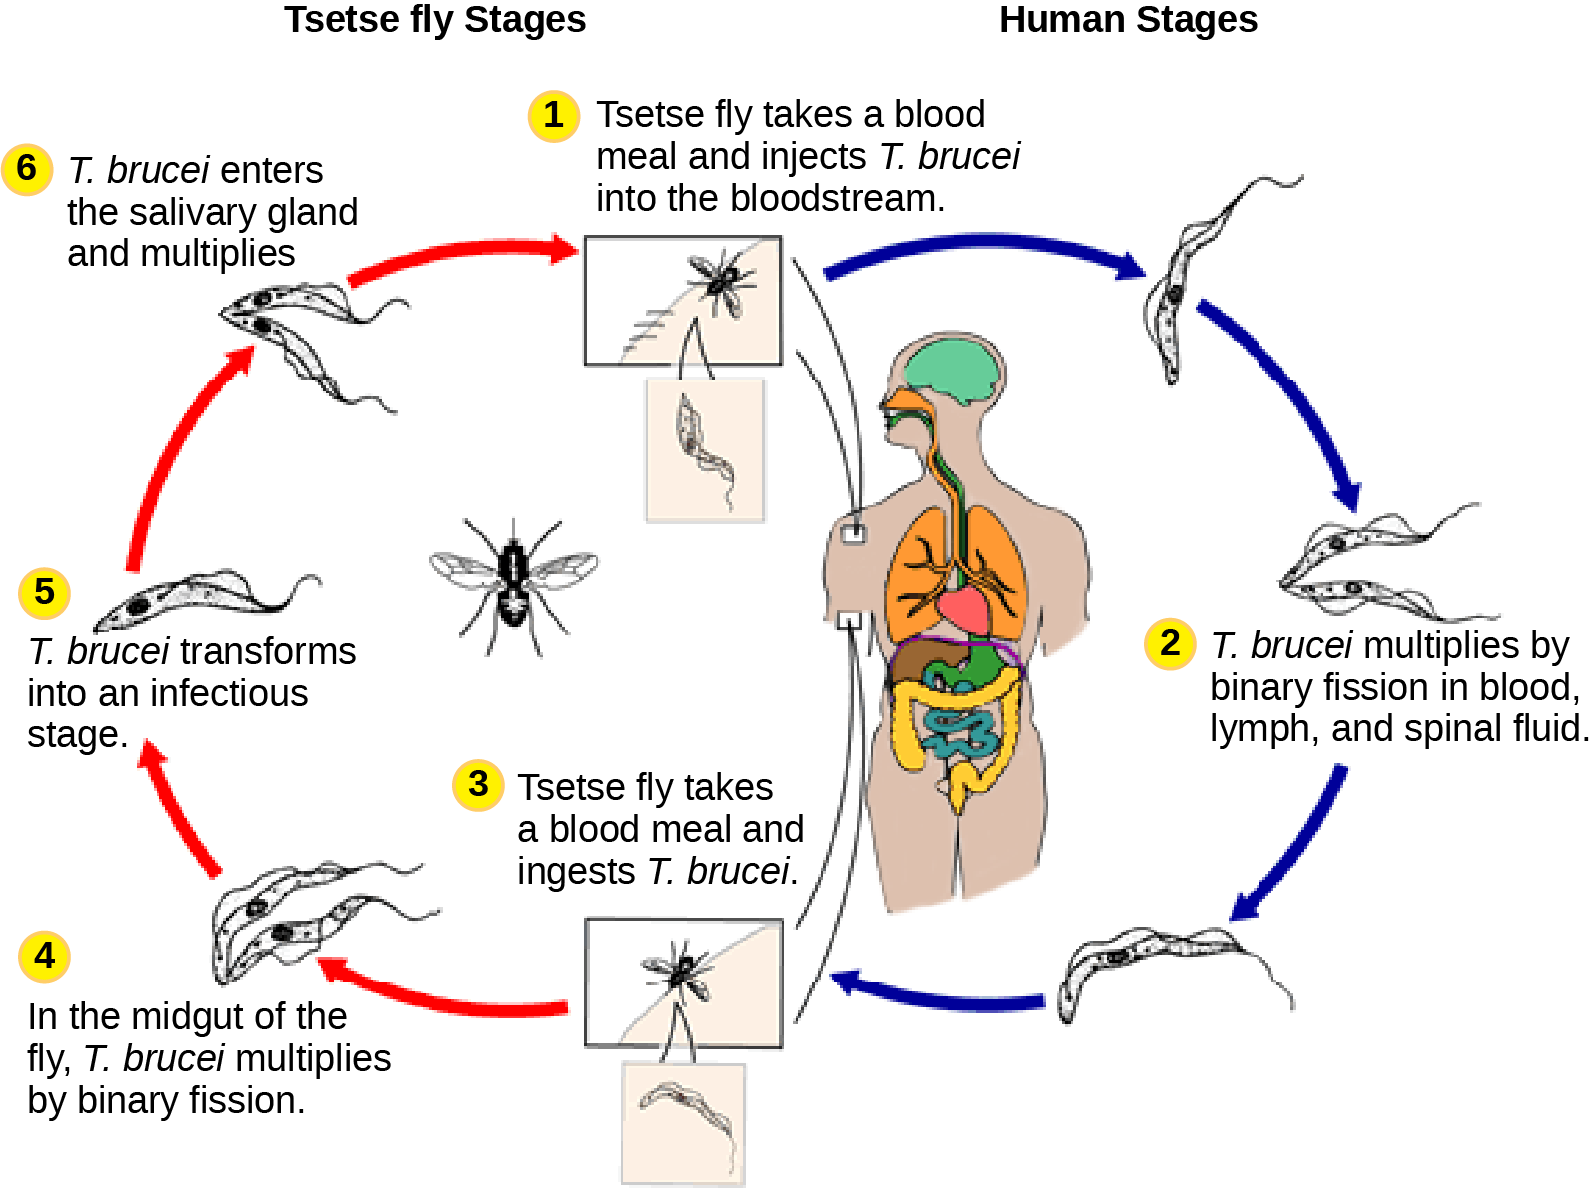 The life cycle of T. brucei begins when the tetse fly takes a blood meal from a human host, and inject the parasite into the bloodstream. T. brucei multiplies by binary fission in blood, lymph and spinal fluid. When another tsetse fly bites the infected person, it takes up the pathogen, which then multiplies by binary fission in the fly’s midgut. T. brucei transforms into an infective stage and enters the salivary gland, where it multiplies. The cycle is completed when the fly takes a blood meal from another human.